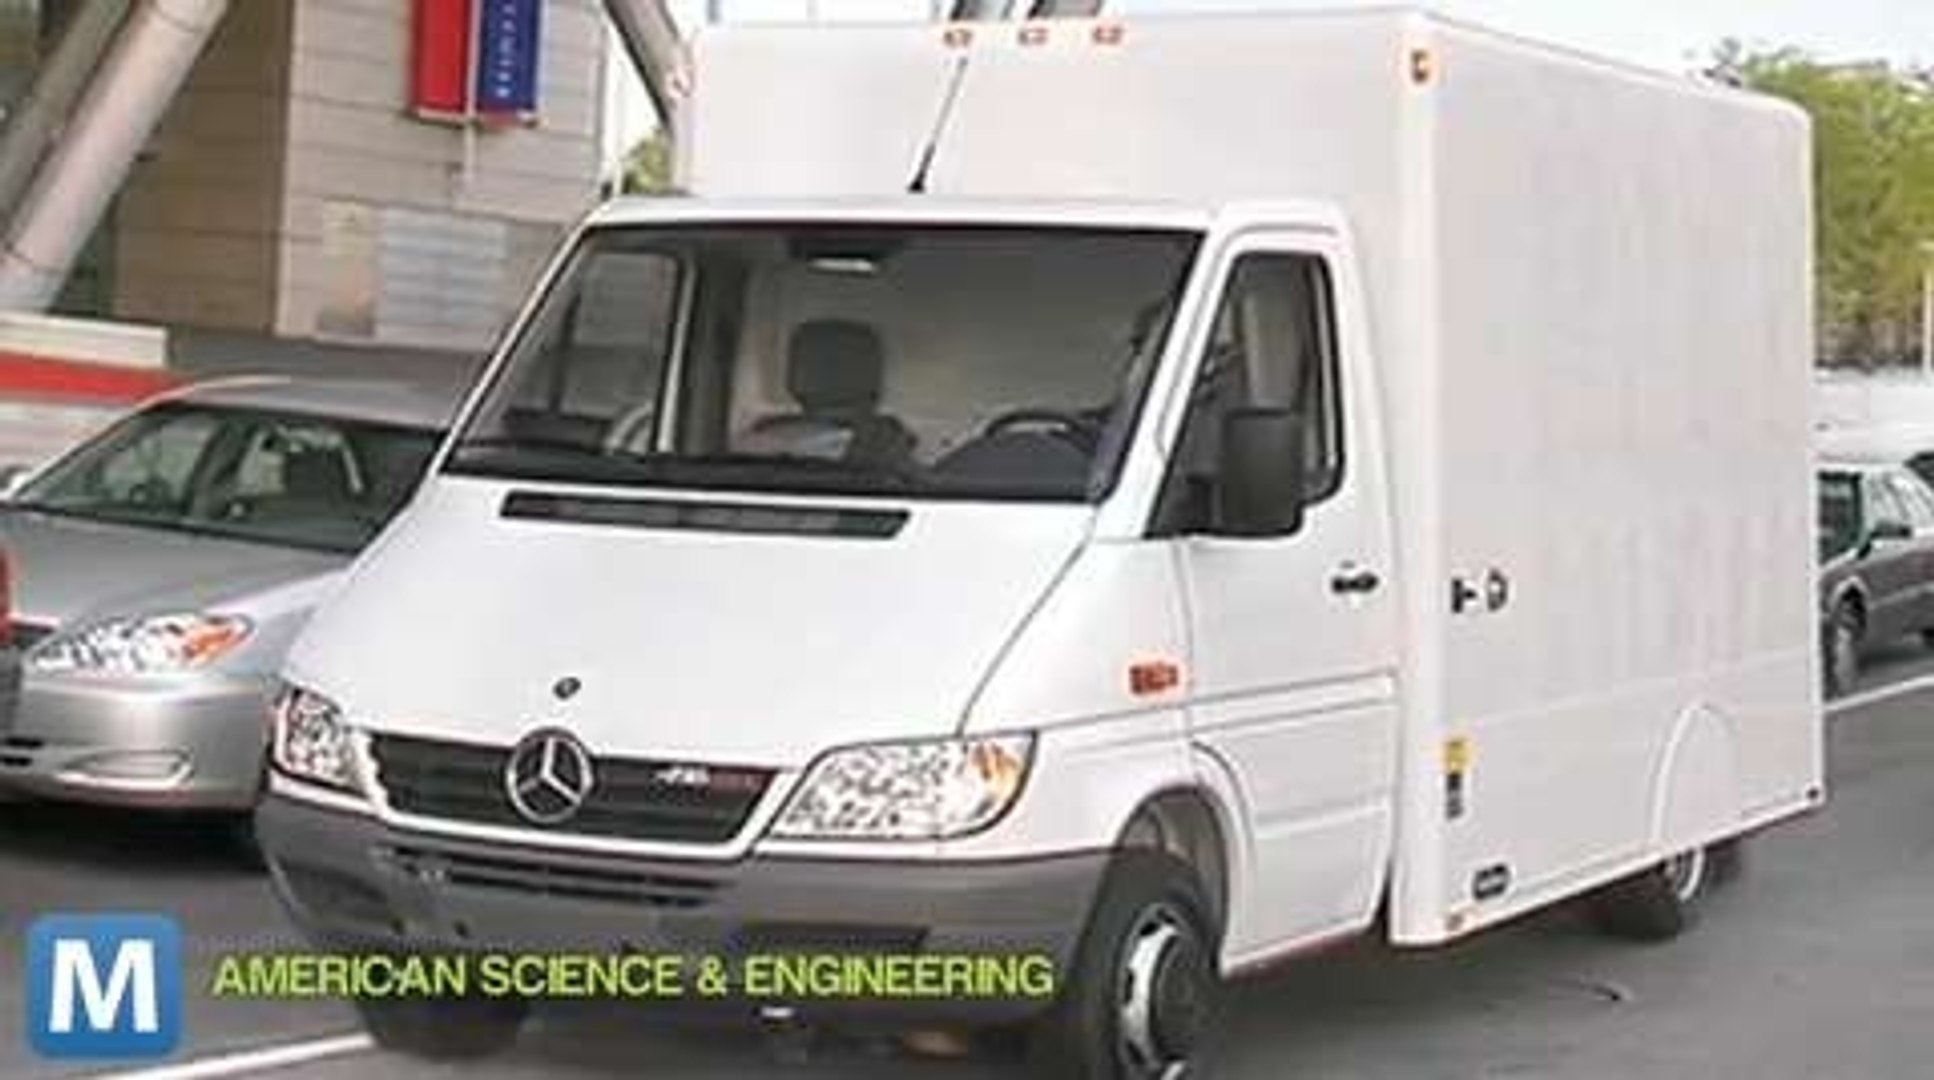 Full Body Scanners Now Used in Vans to Monitor Streets - video Dailymotion